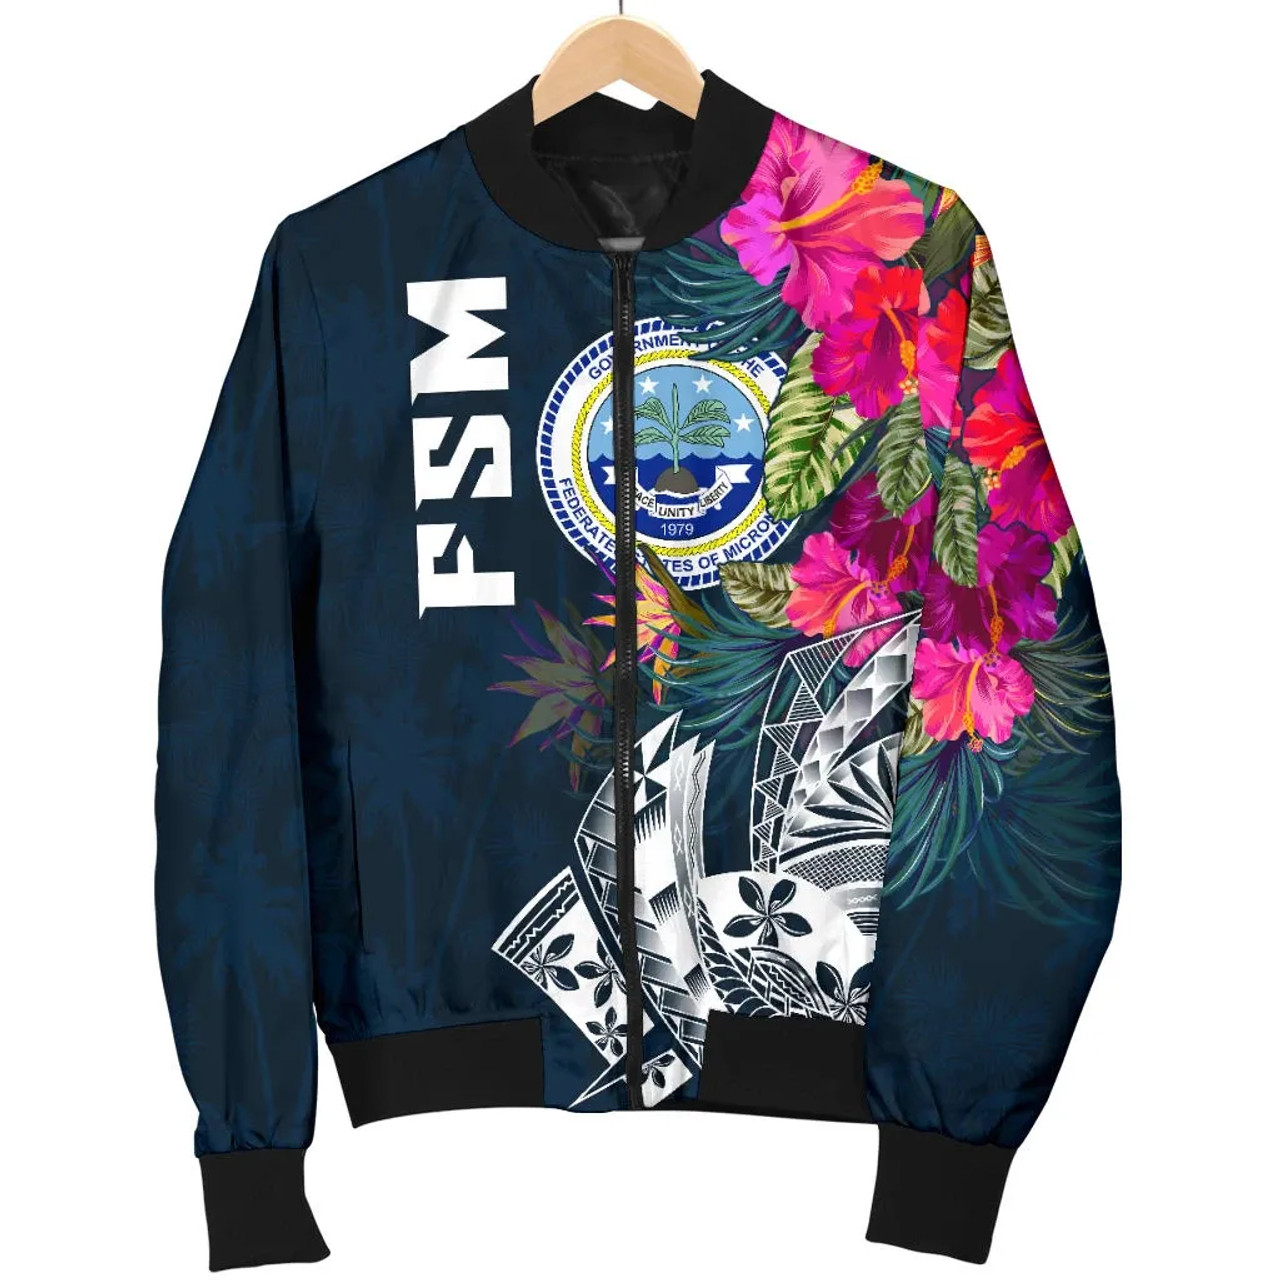 Federated States Of Micronesia Bomber Jacket - Summer Vibes 5